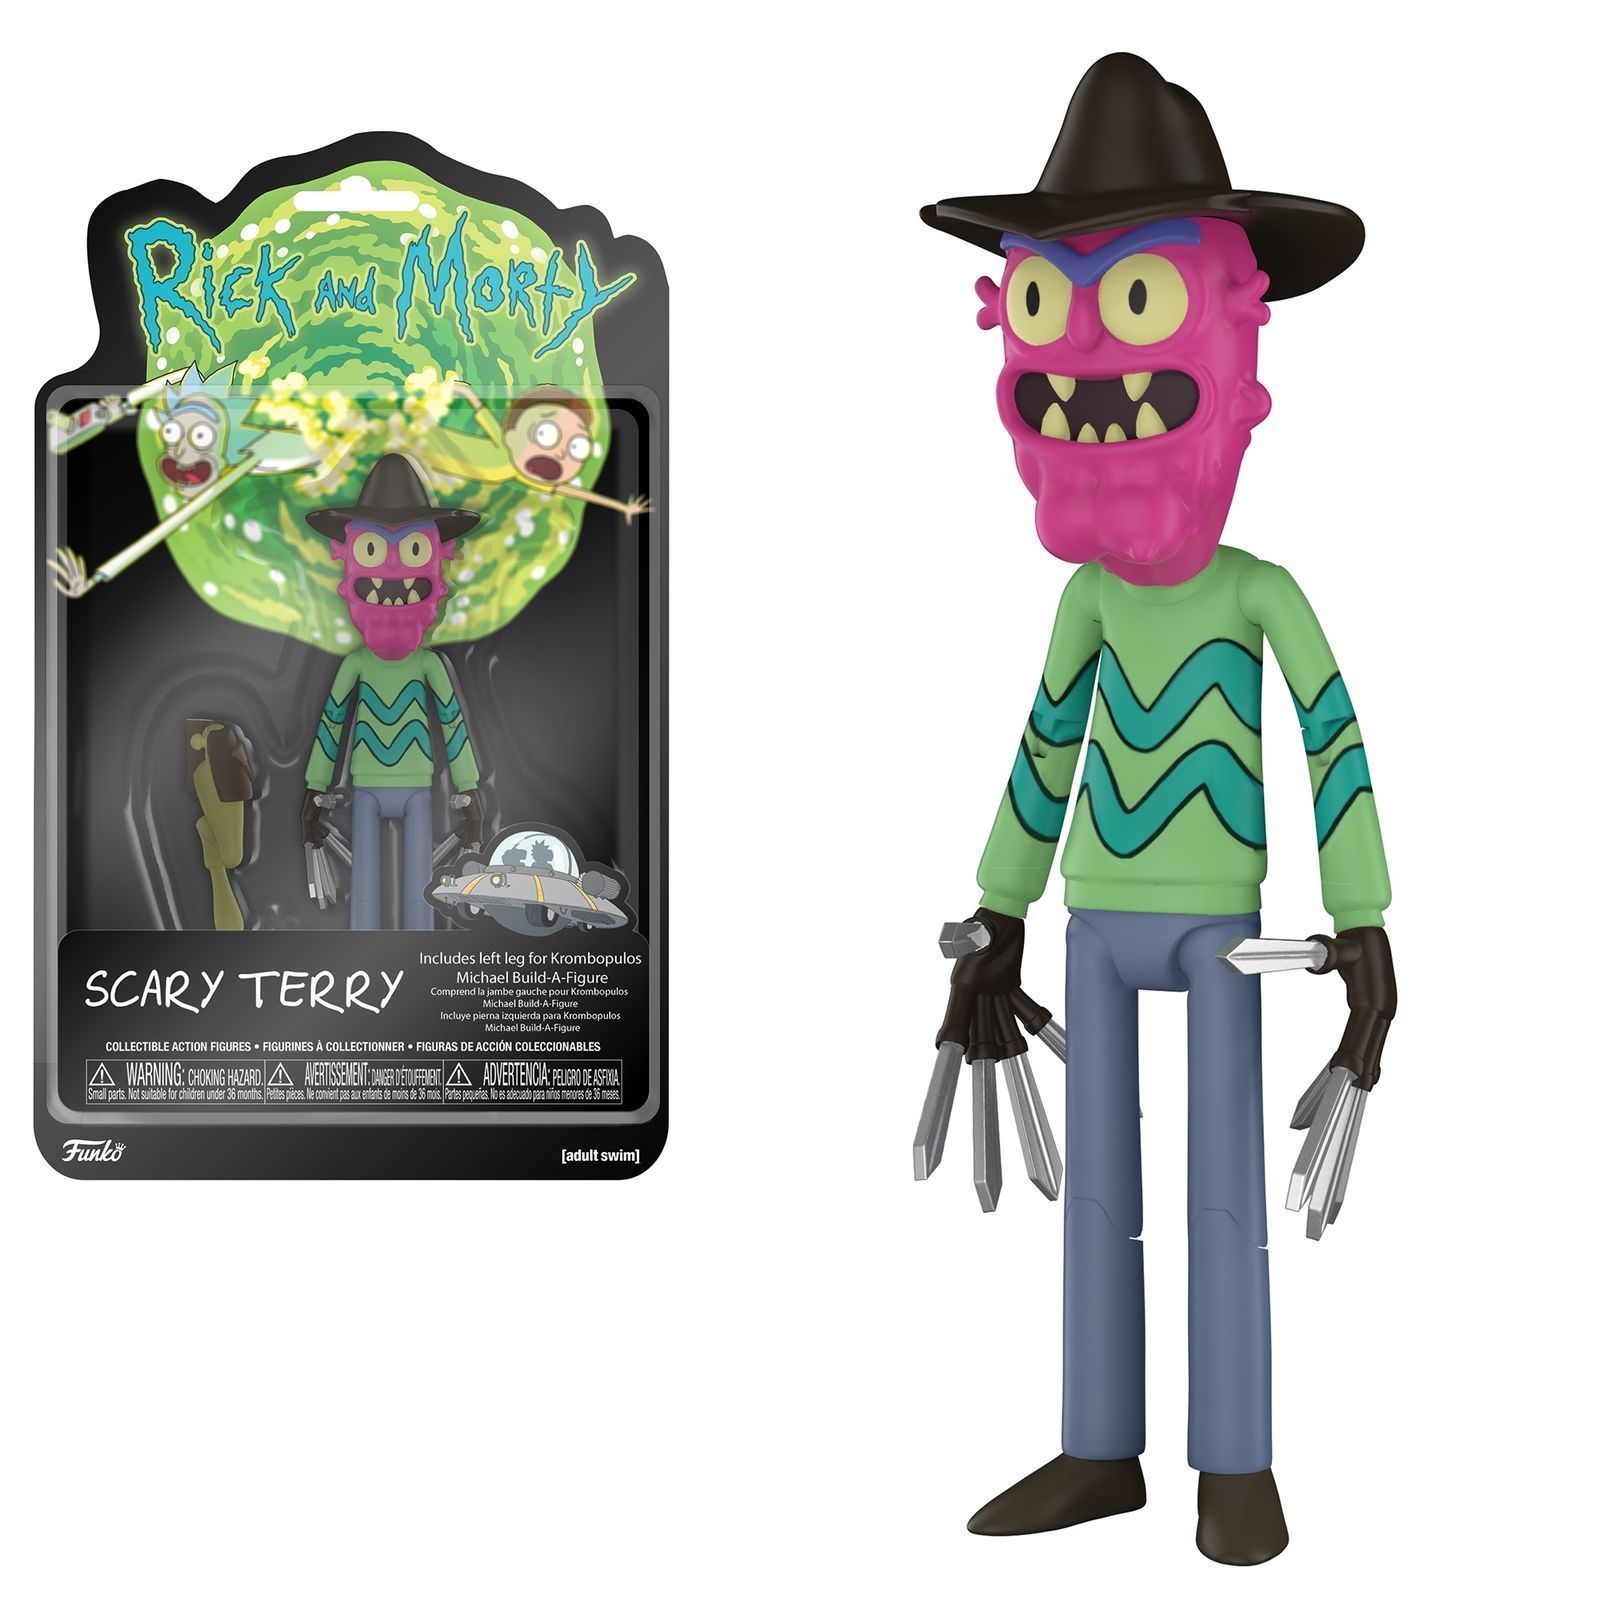 Brand New/Factory Sealed. RARE Funko Rick and Morty SCARY TERRY Action Figure 